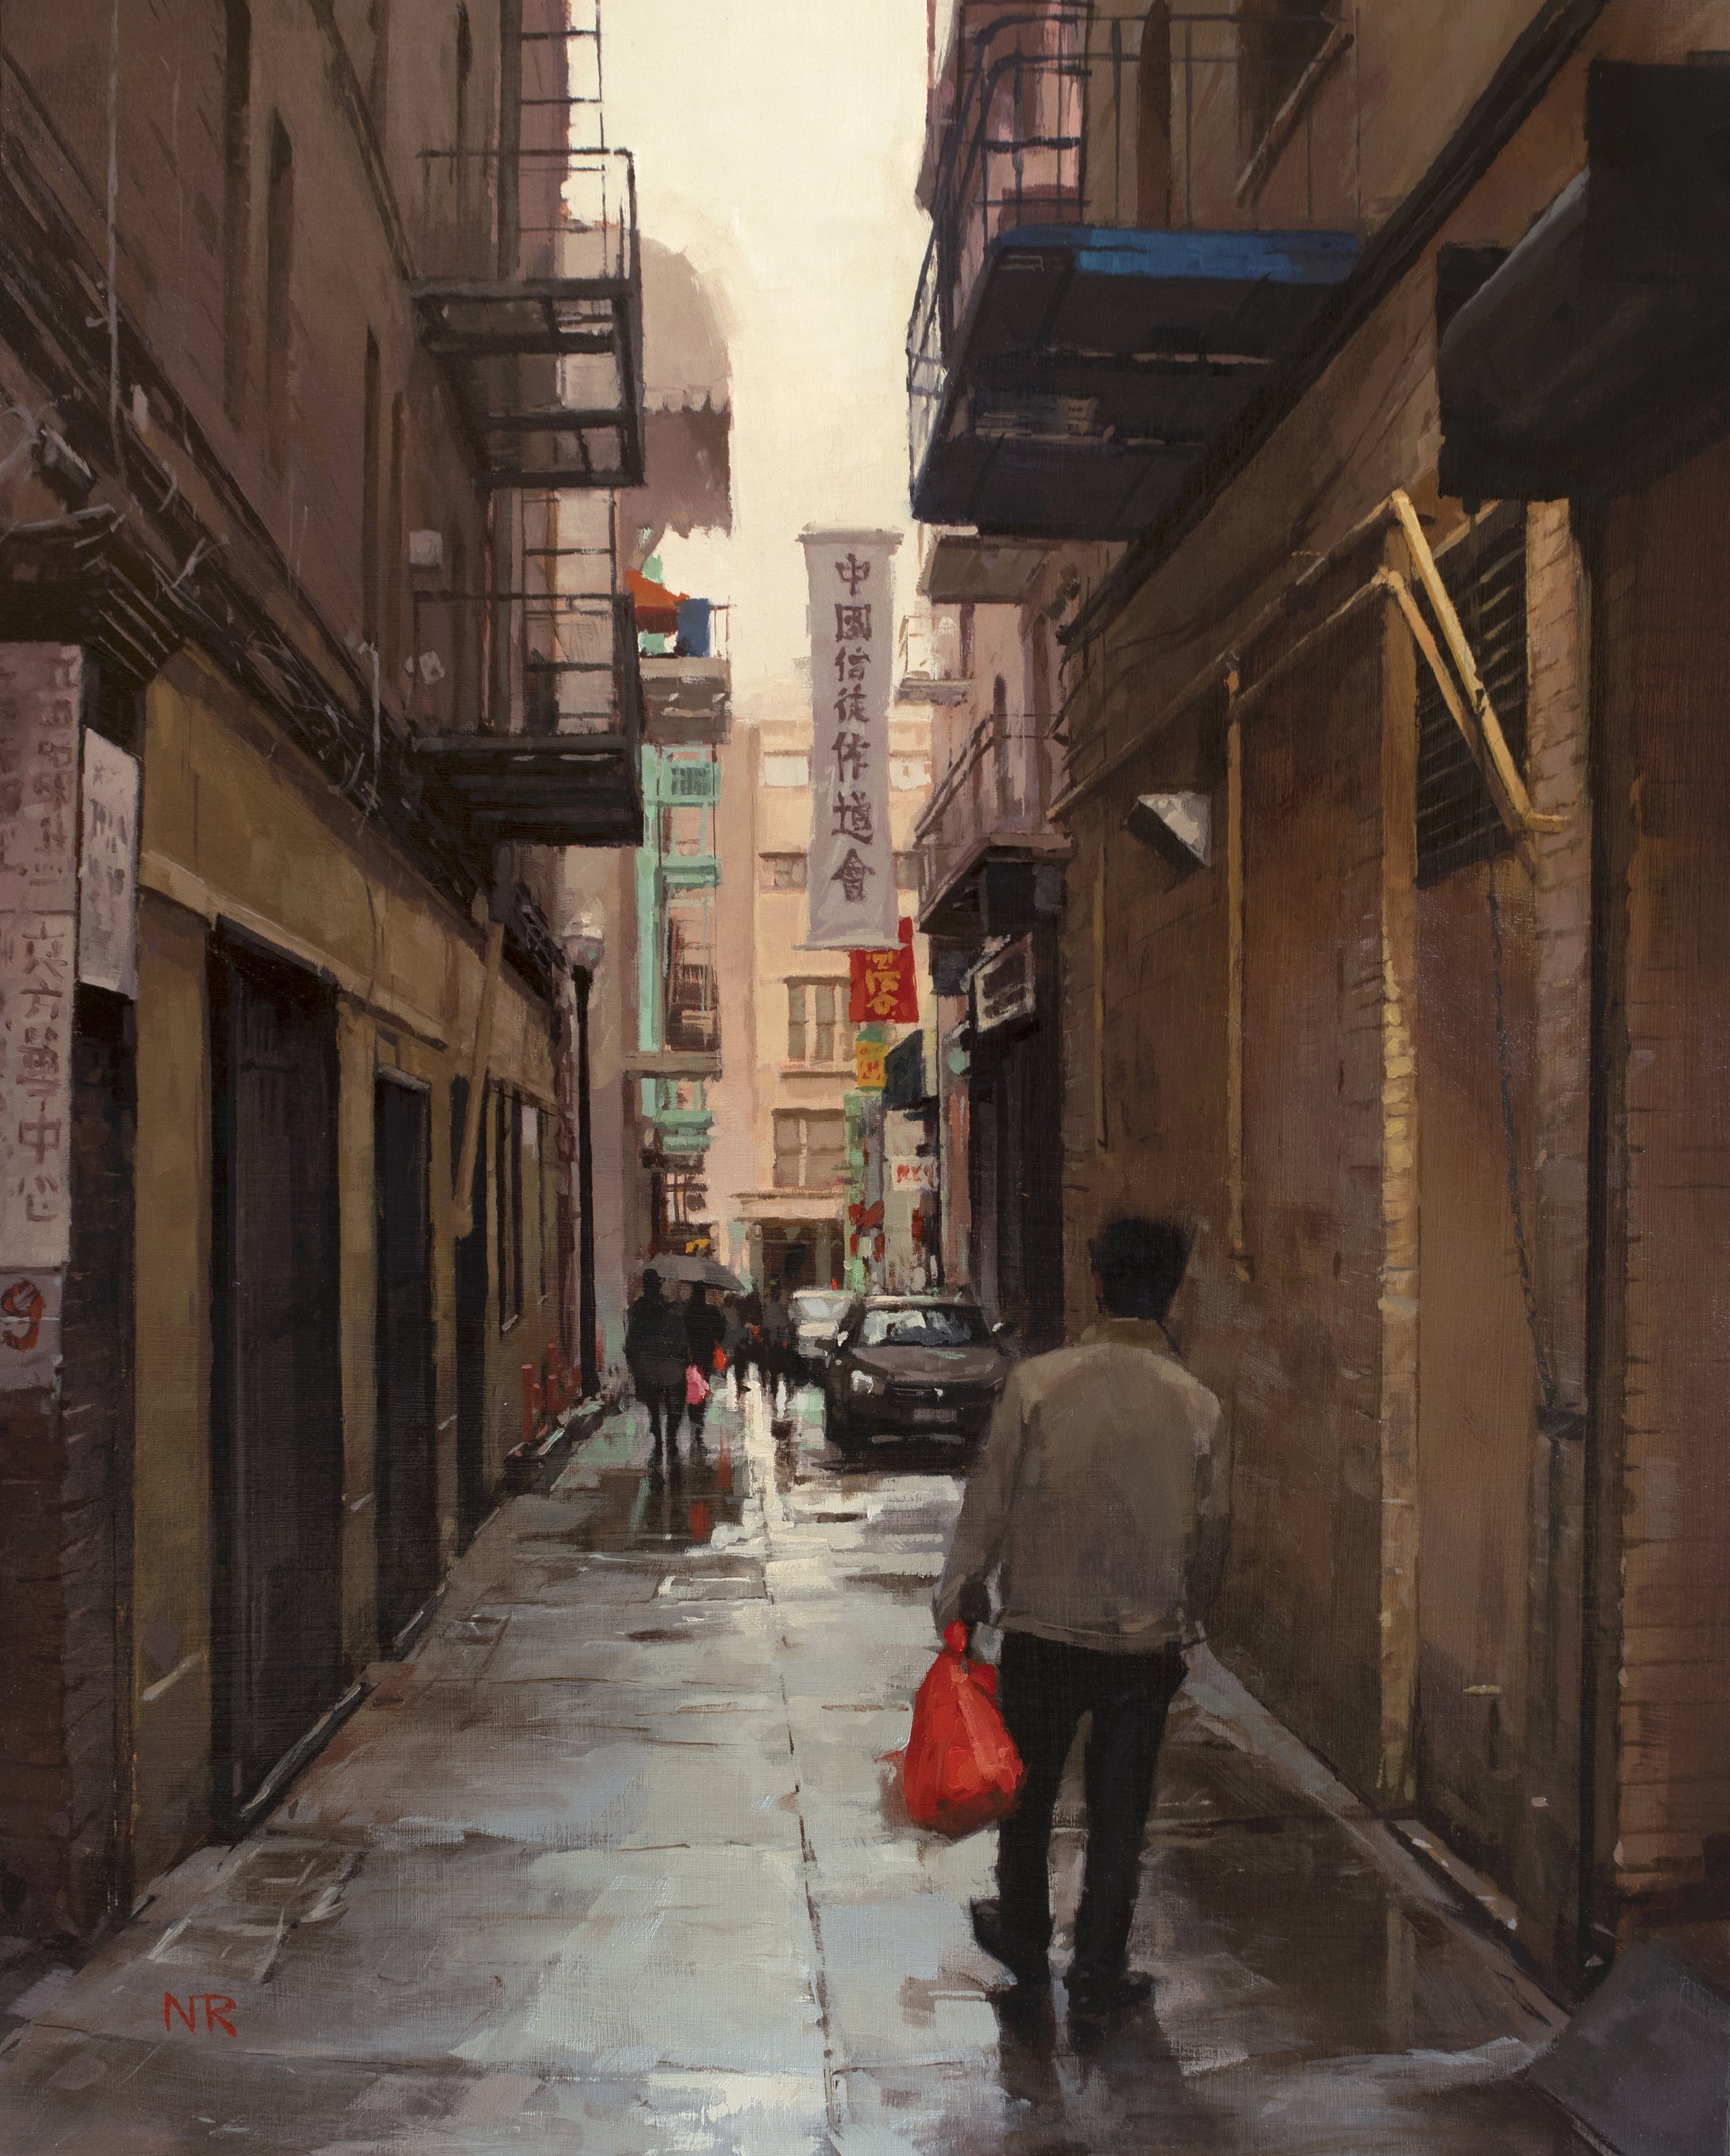 Afternoon Rain on Ross Alley by Nate Ross